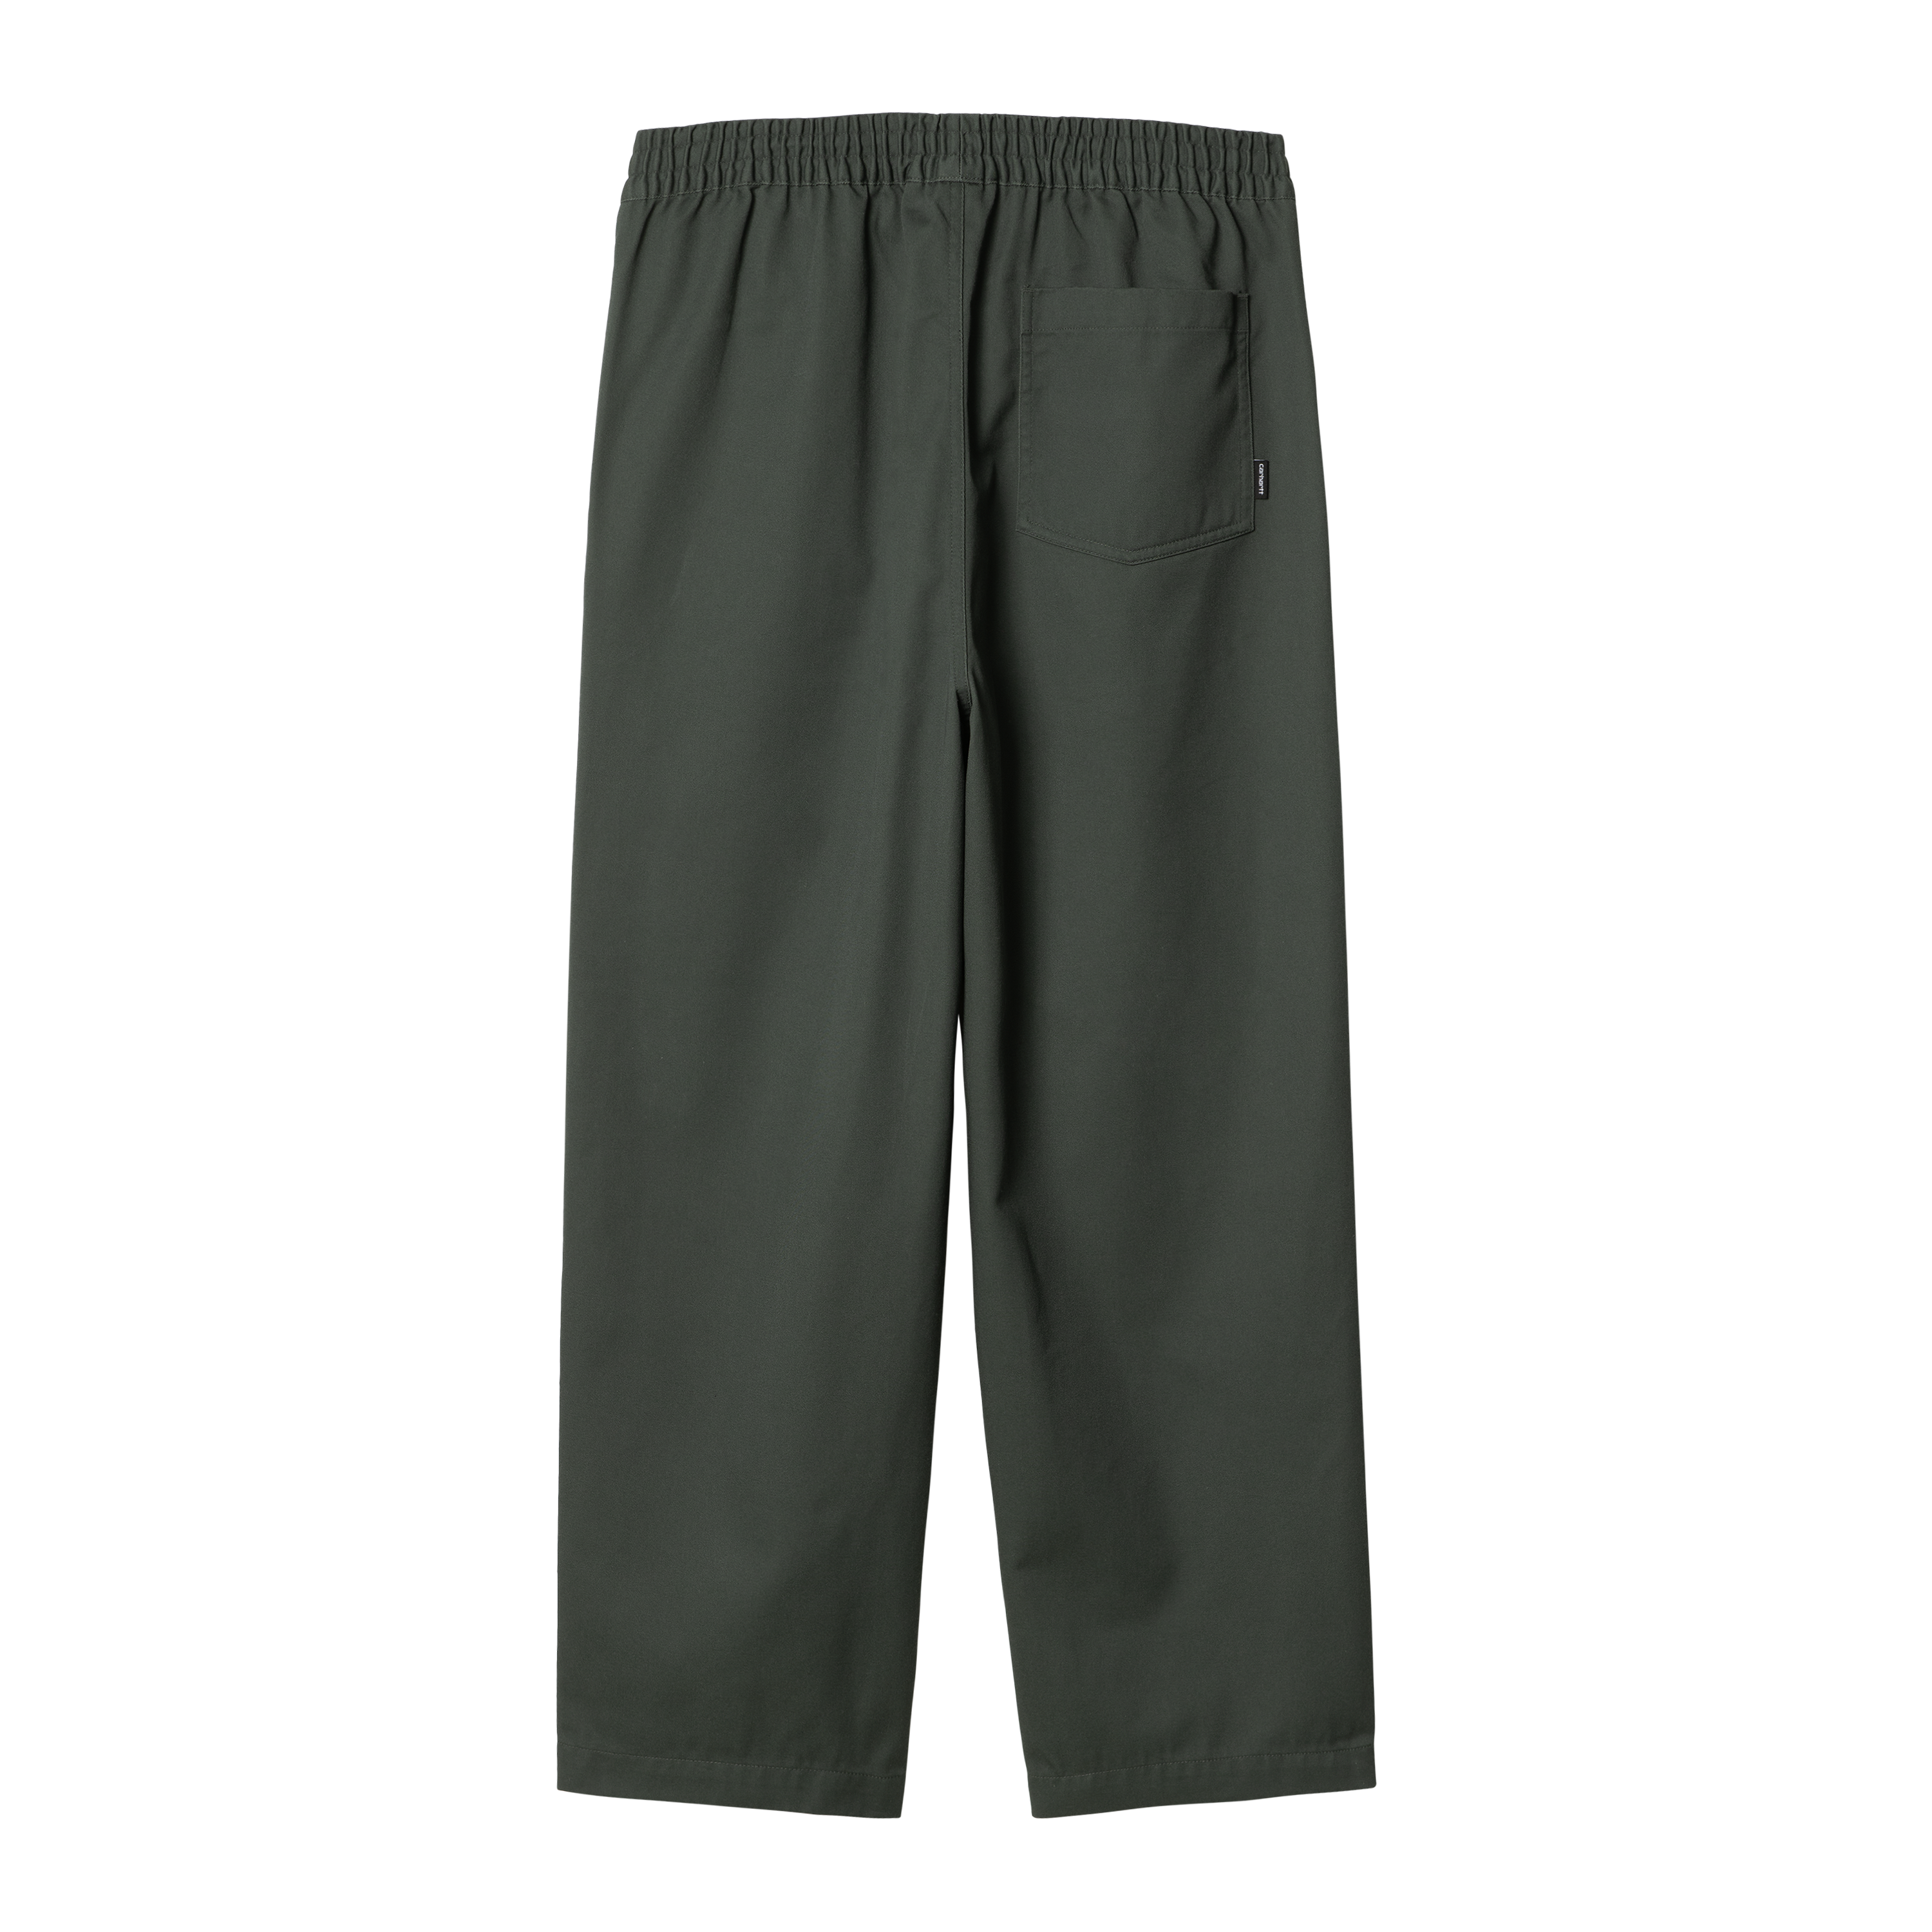 Carhartt WIP Newhaven Pant in Green